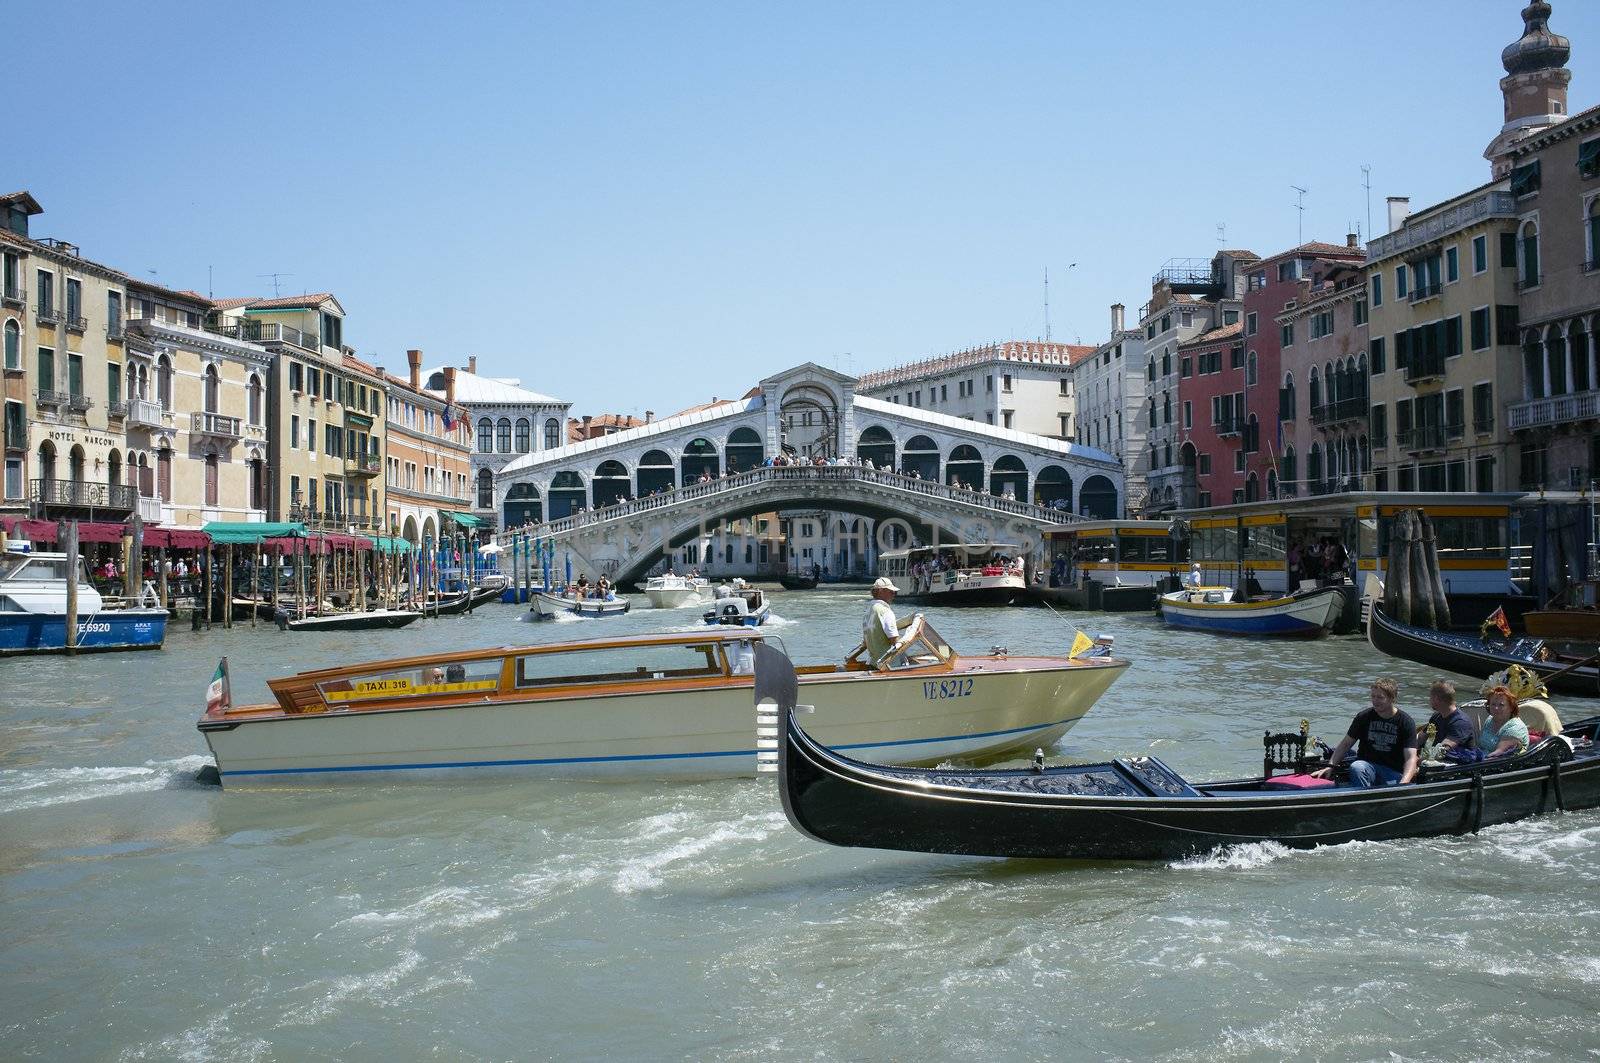 Grand Canal traffic by Stocksnapper